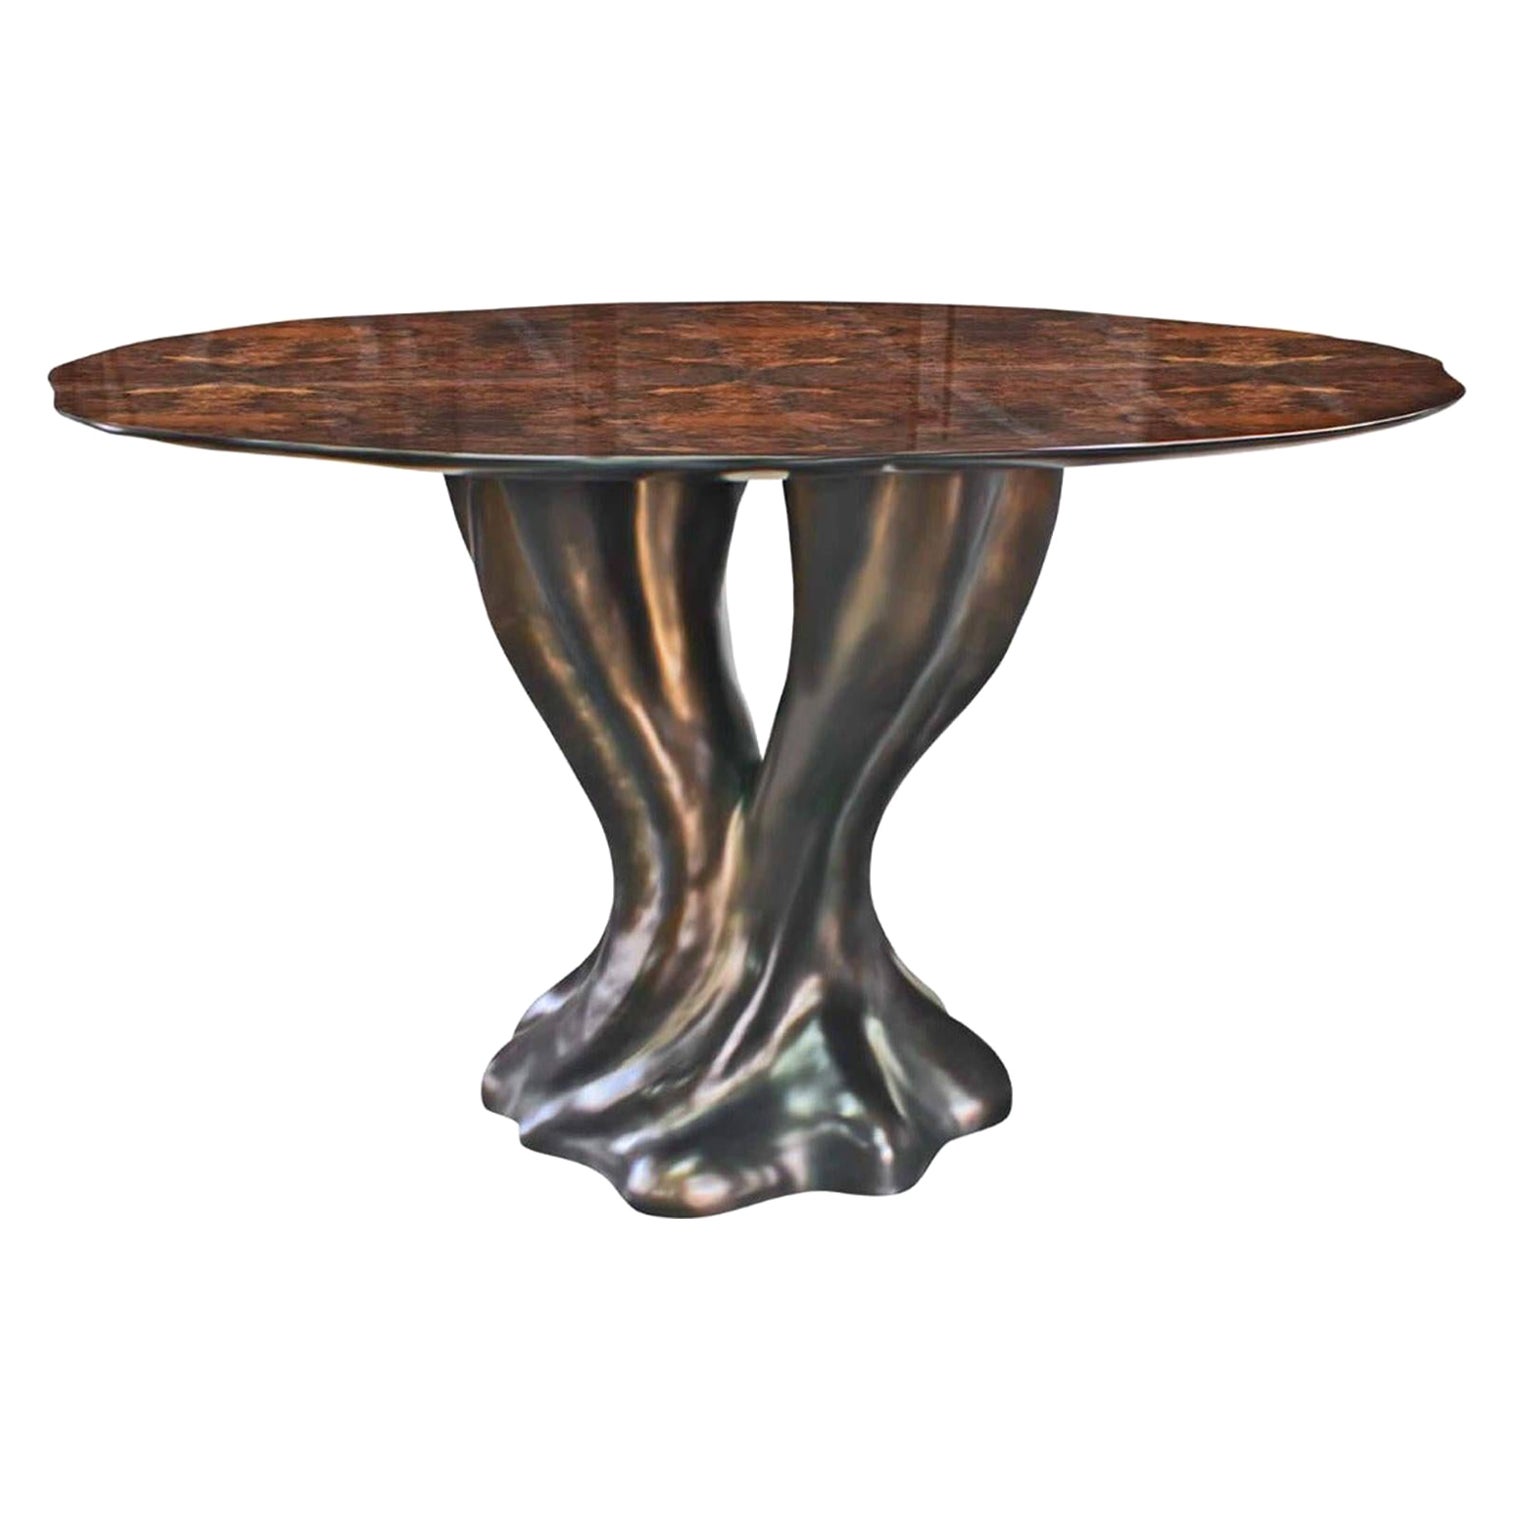 New Design Dining Table in Wood with Walnut Root Veneer 4/6 Persons